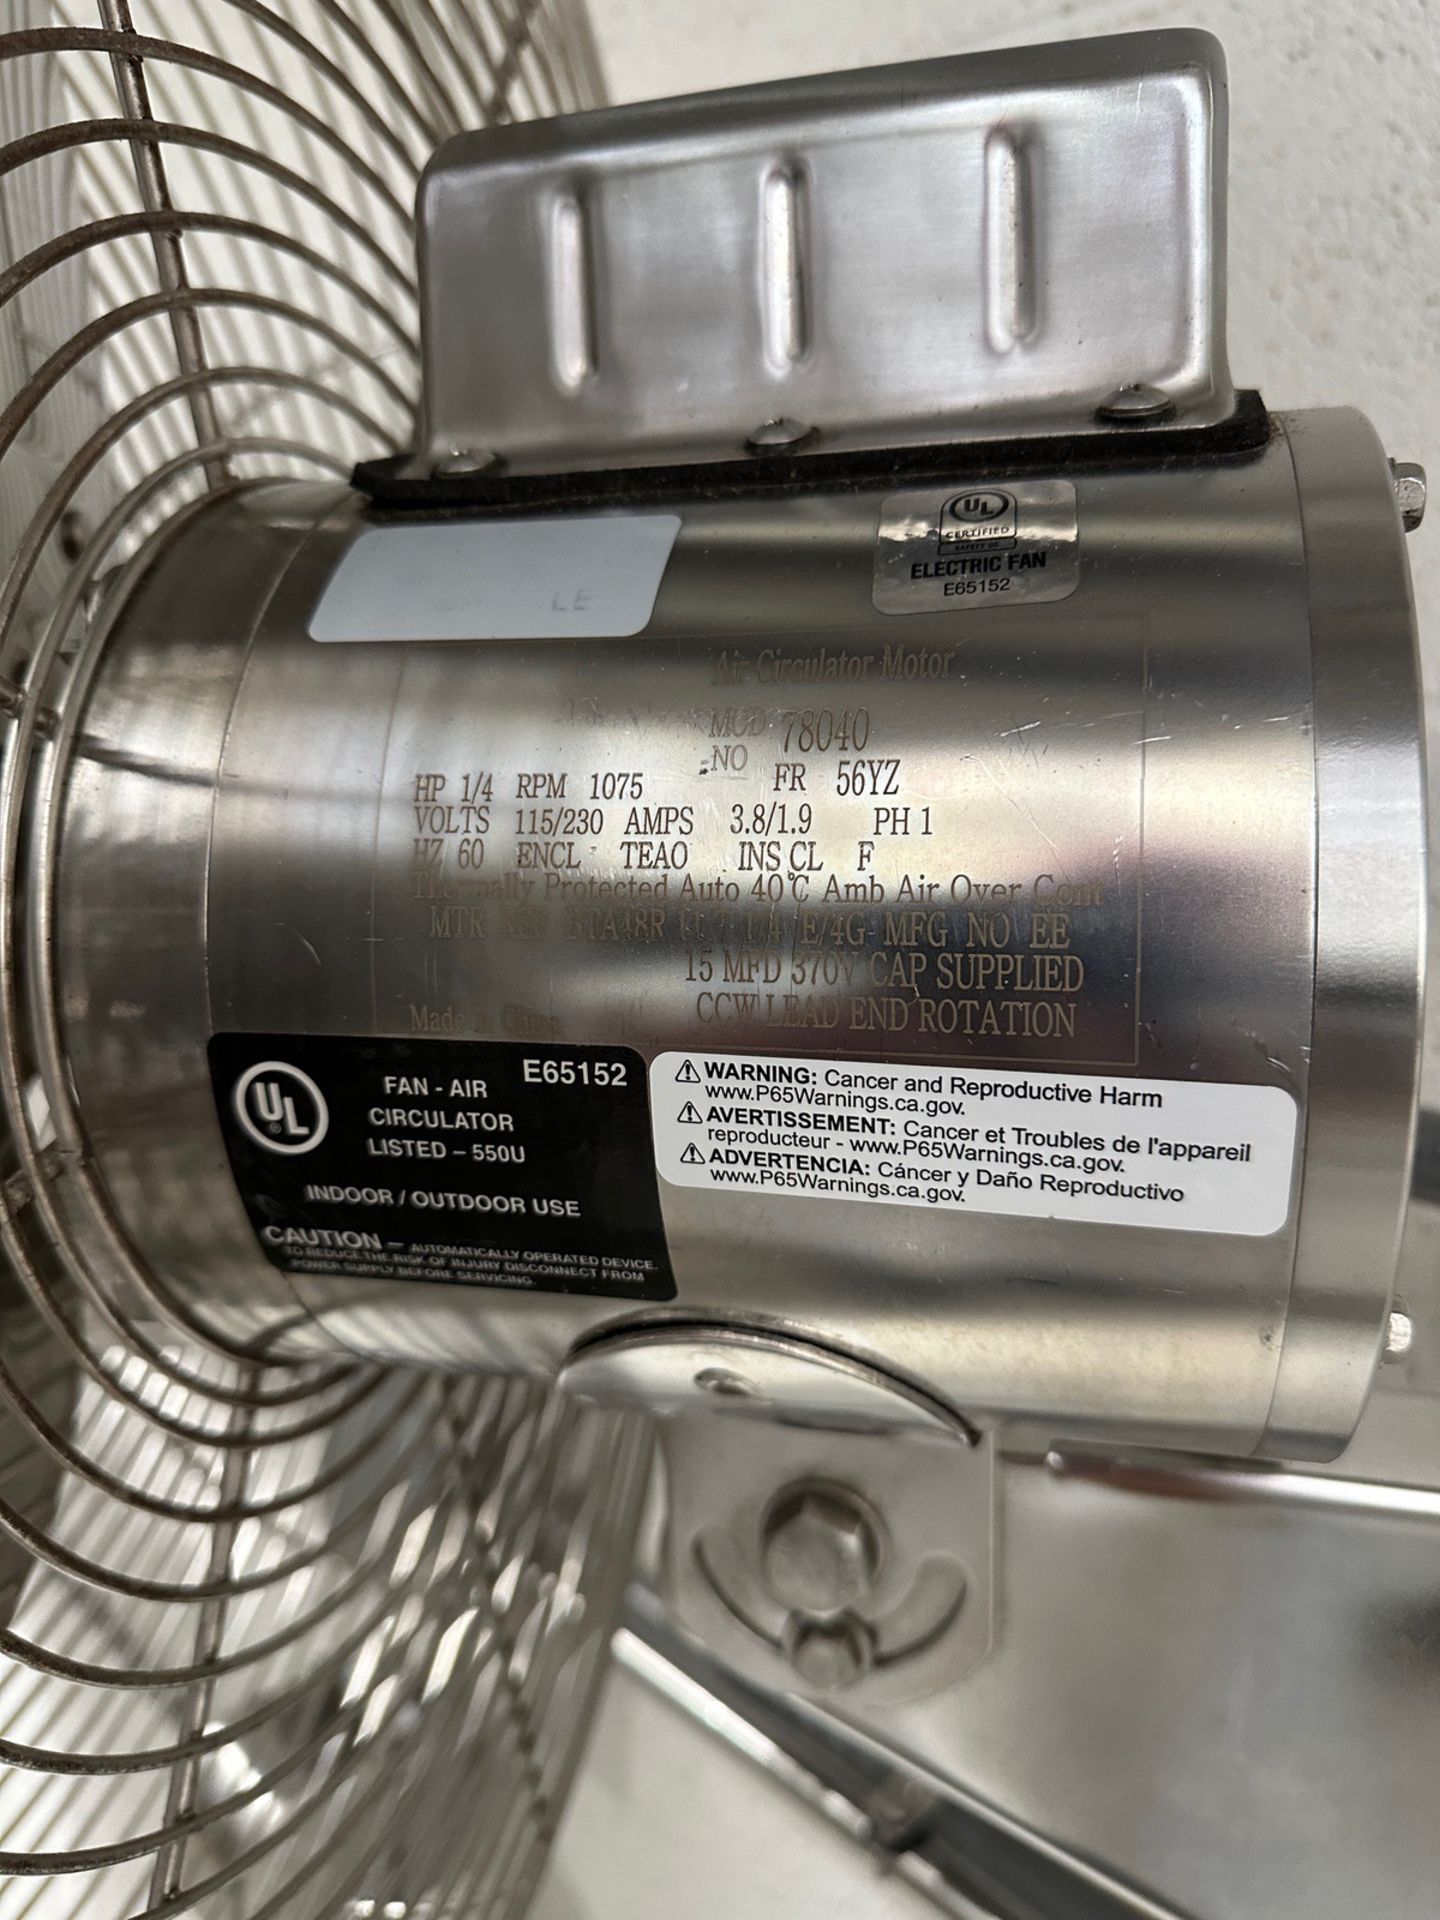 Lot of (4) 24" Dayton 1/4 HP Stainless Steel Wall Mounted Fans - Model E65152 | Rig Fee $200 - Image 3 of 5